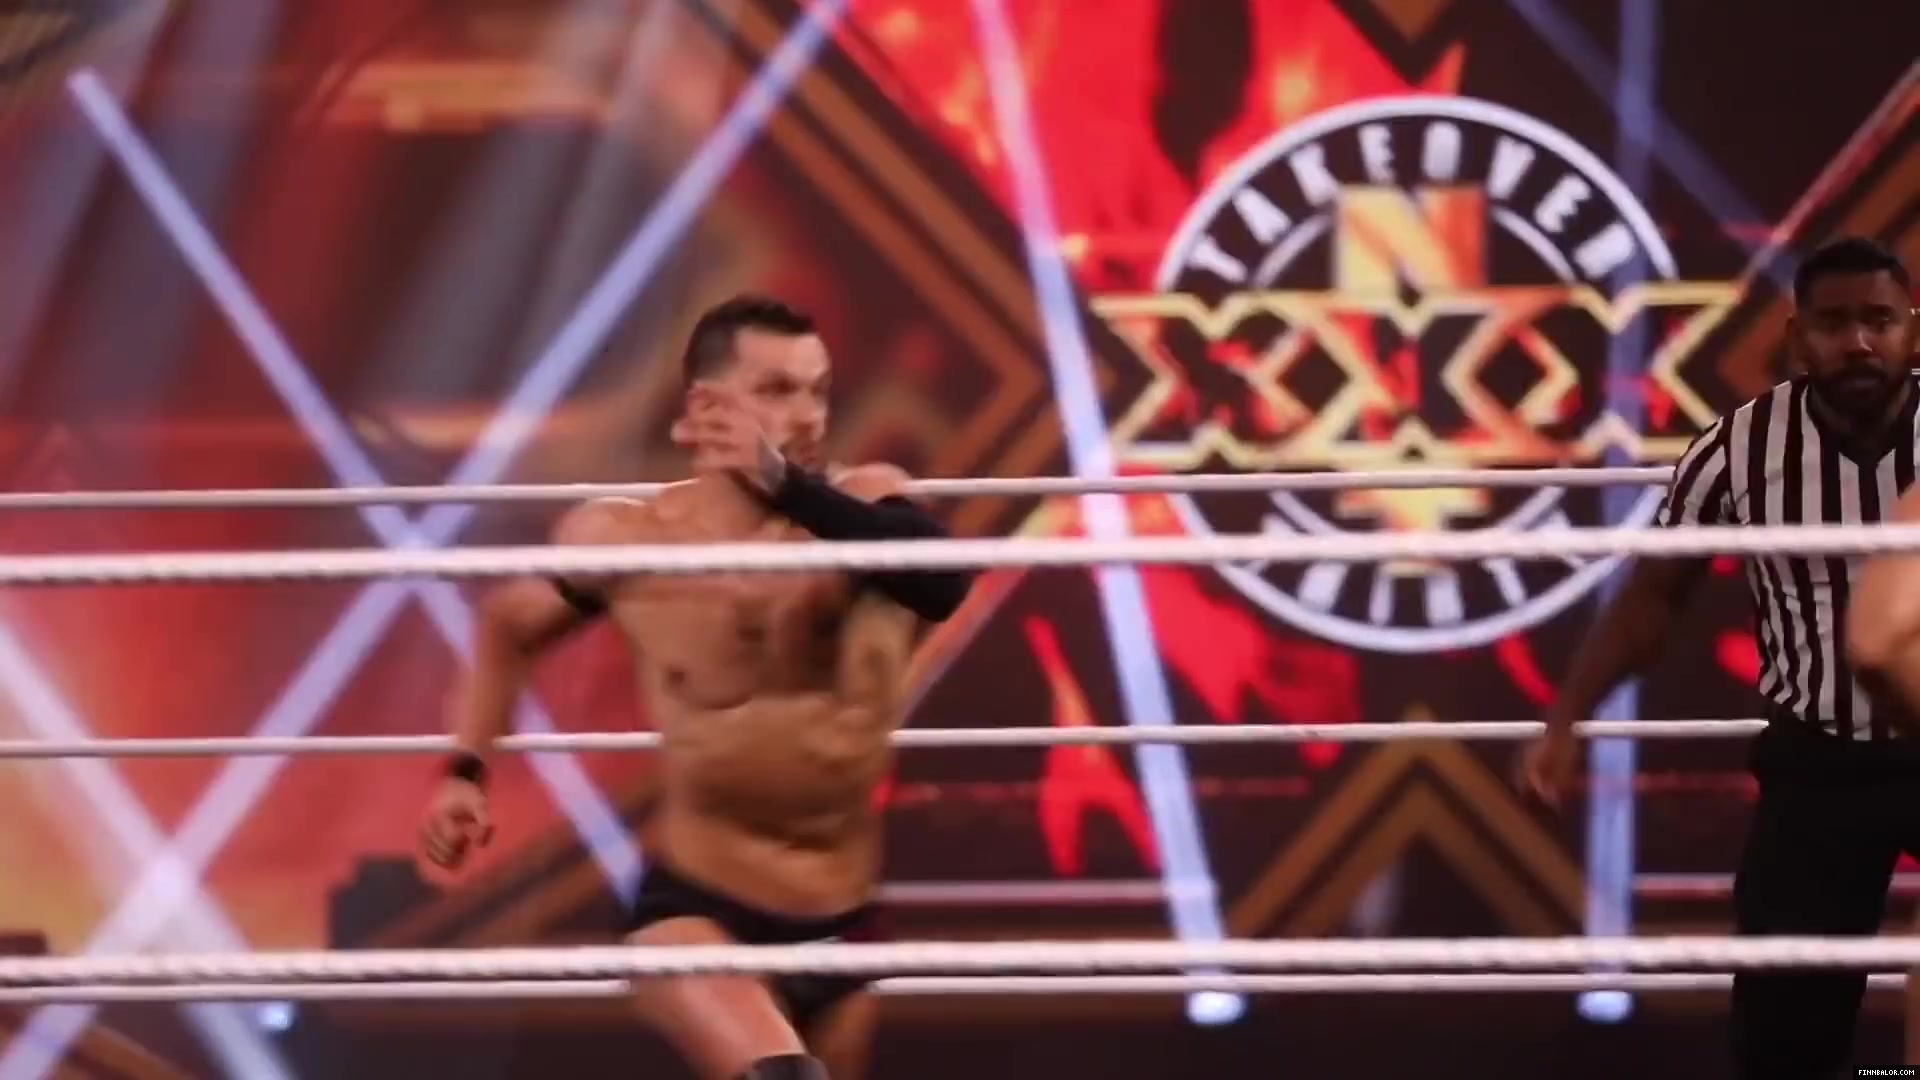 Finn_Balor___The_Rising_of_the_Prince_in_NXT_532.jpg